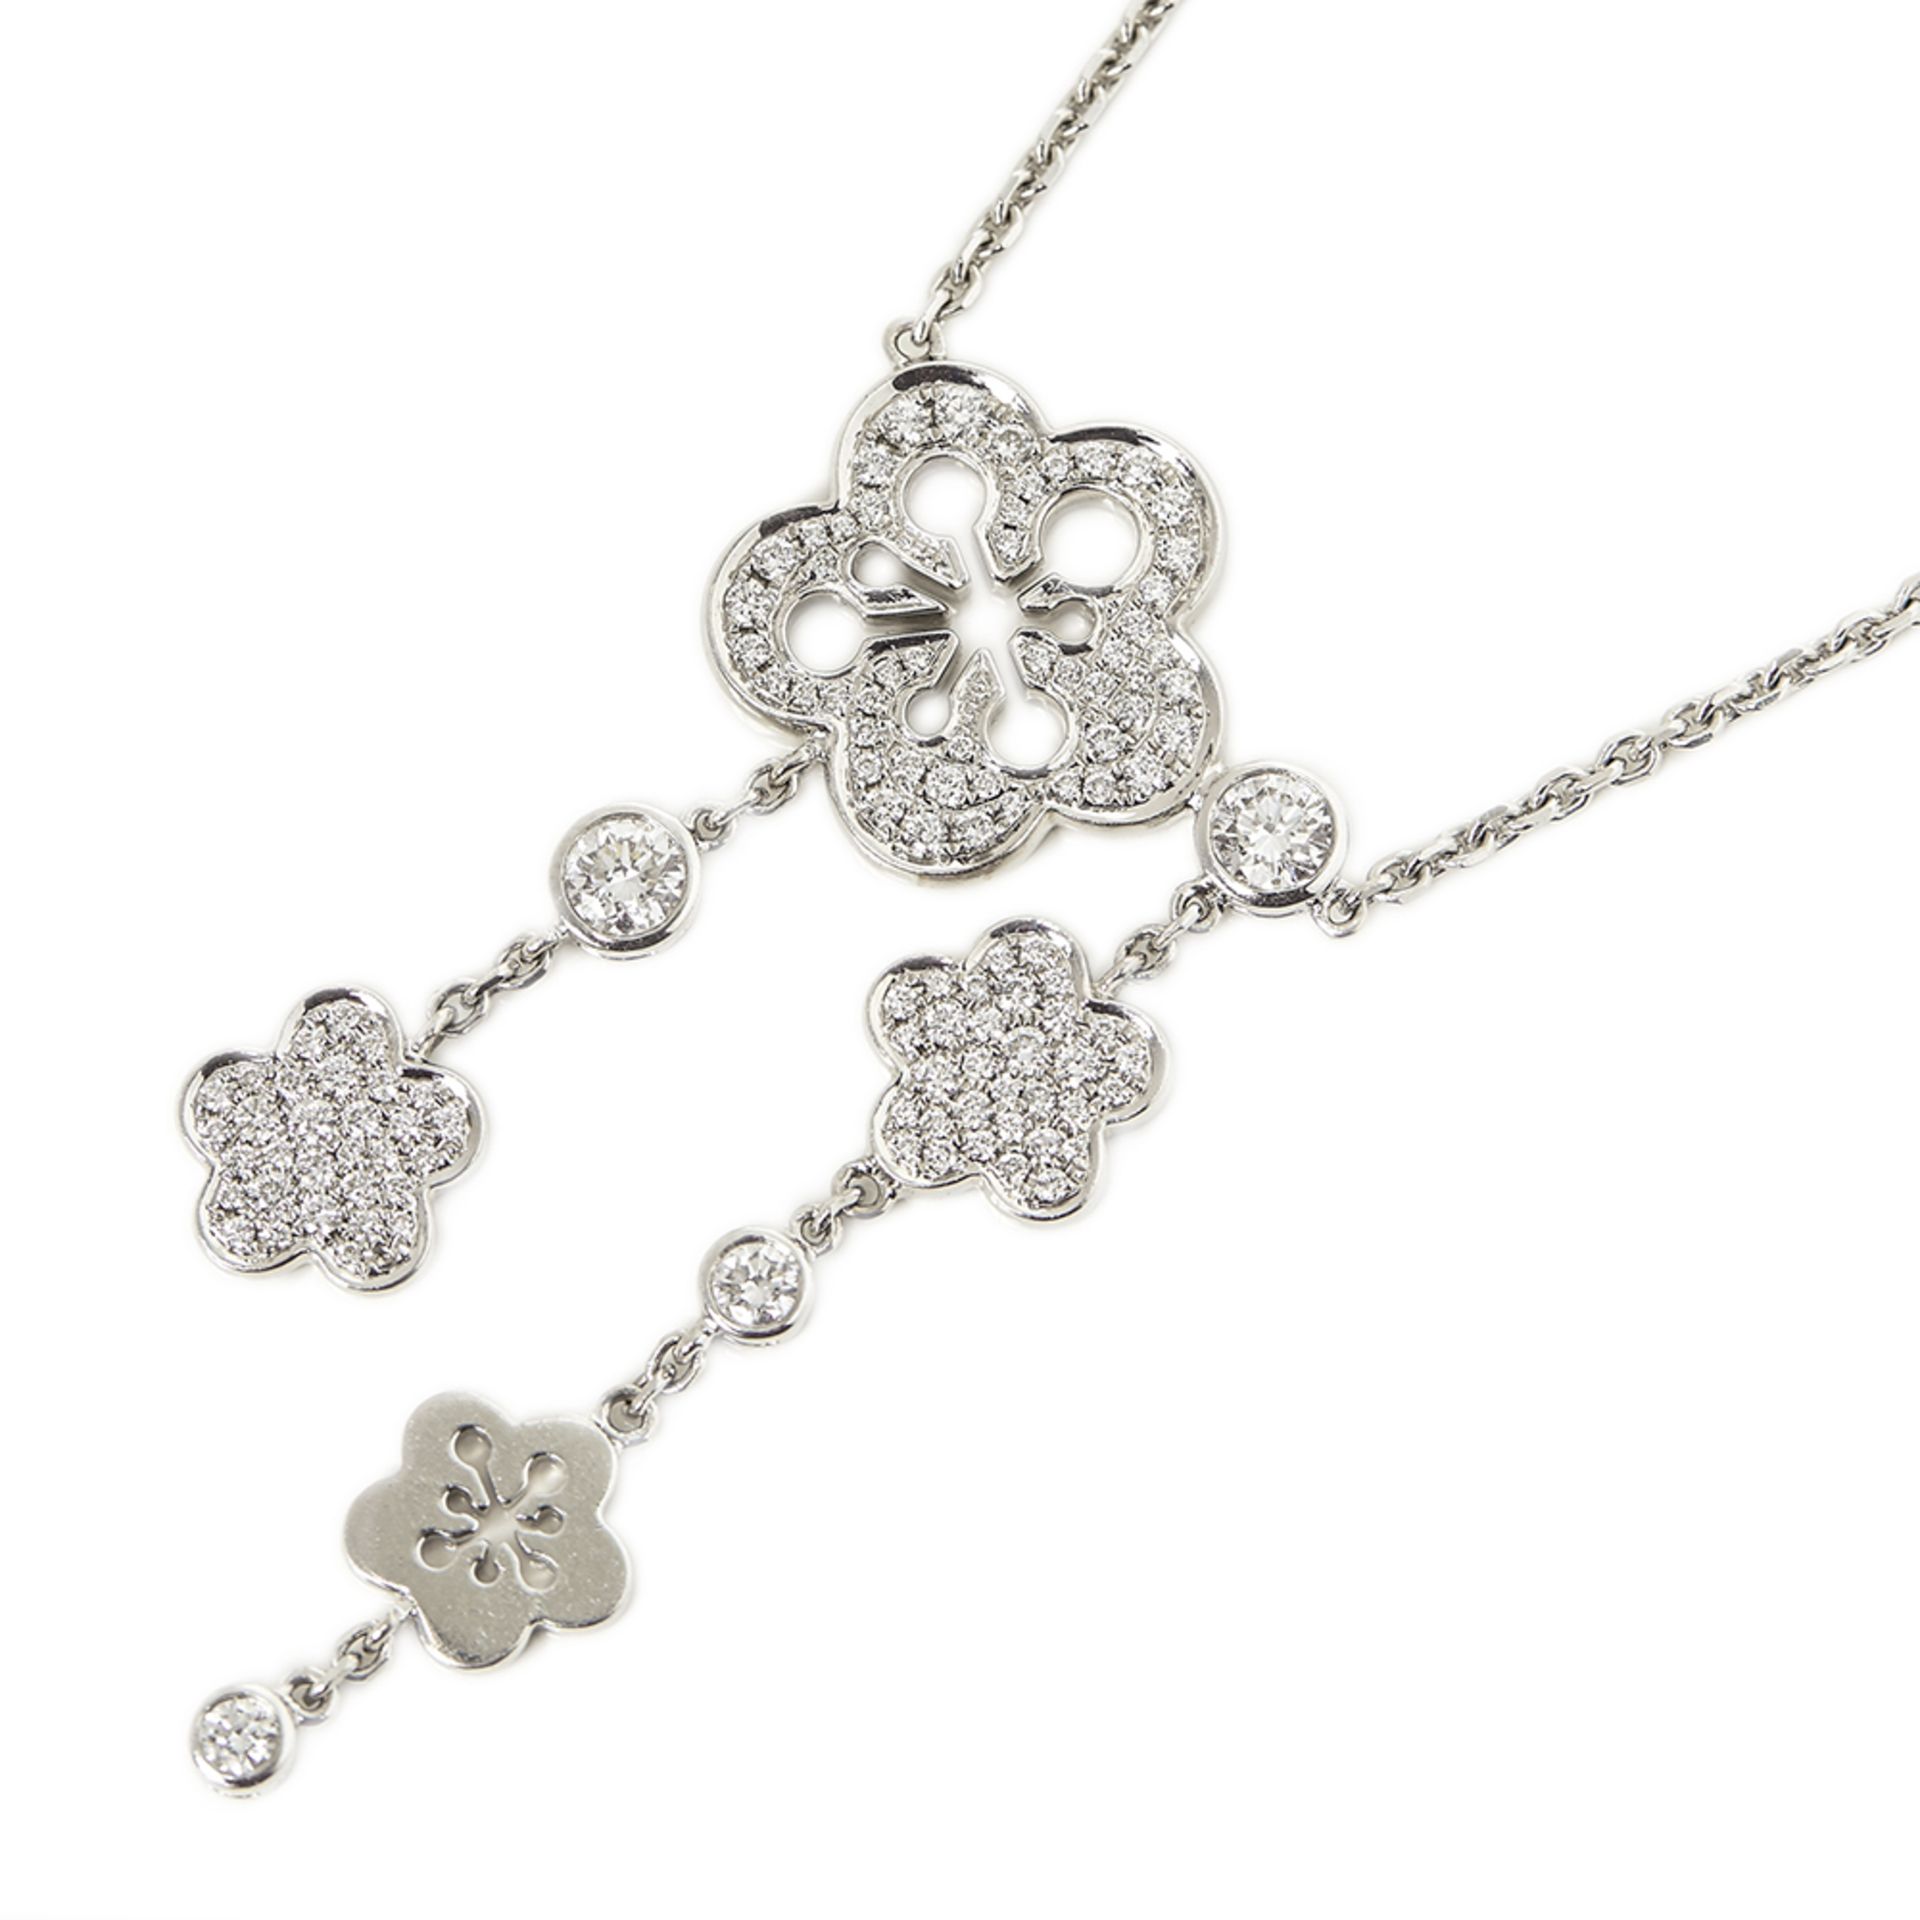 Boodles 18k White Gold Diamond Blossom Necklace - Image 9 of 9